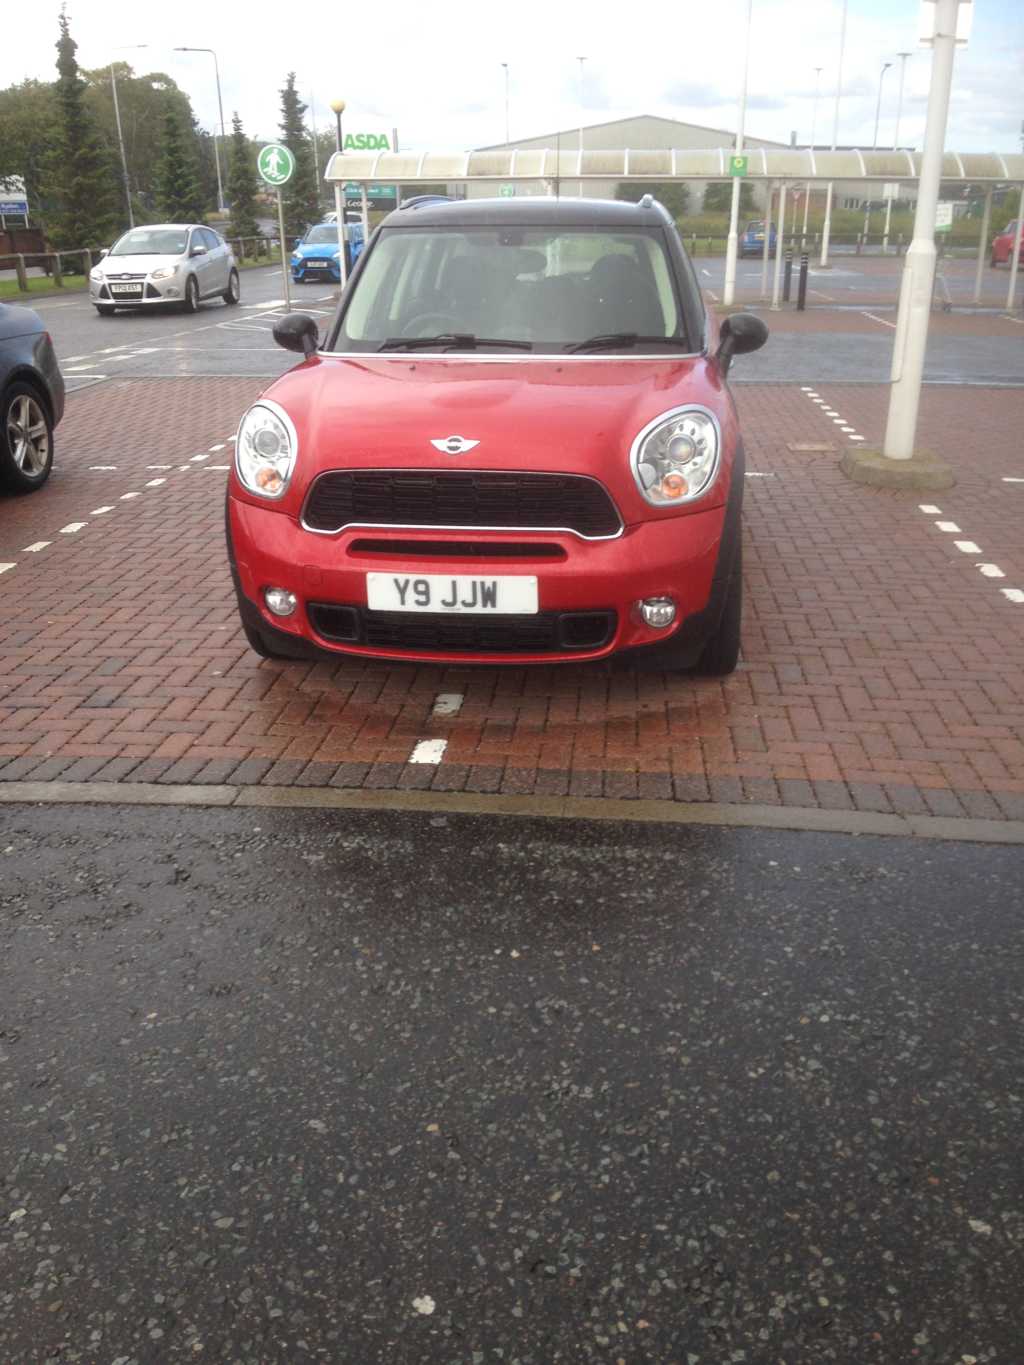 Y9 JJW is an Inconsiderate Parker